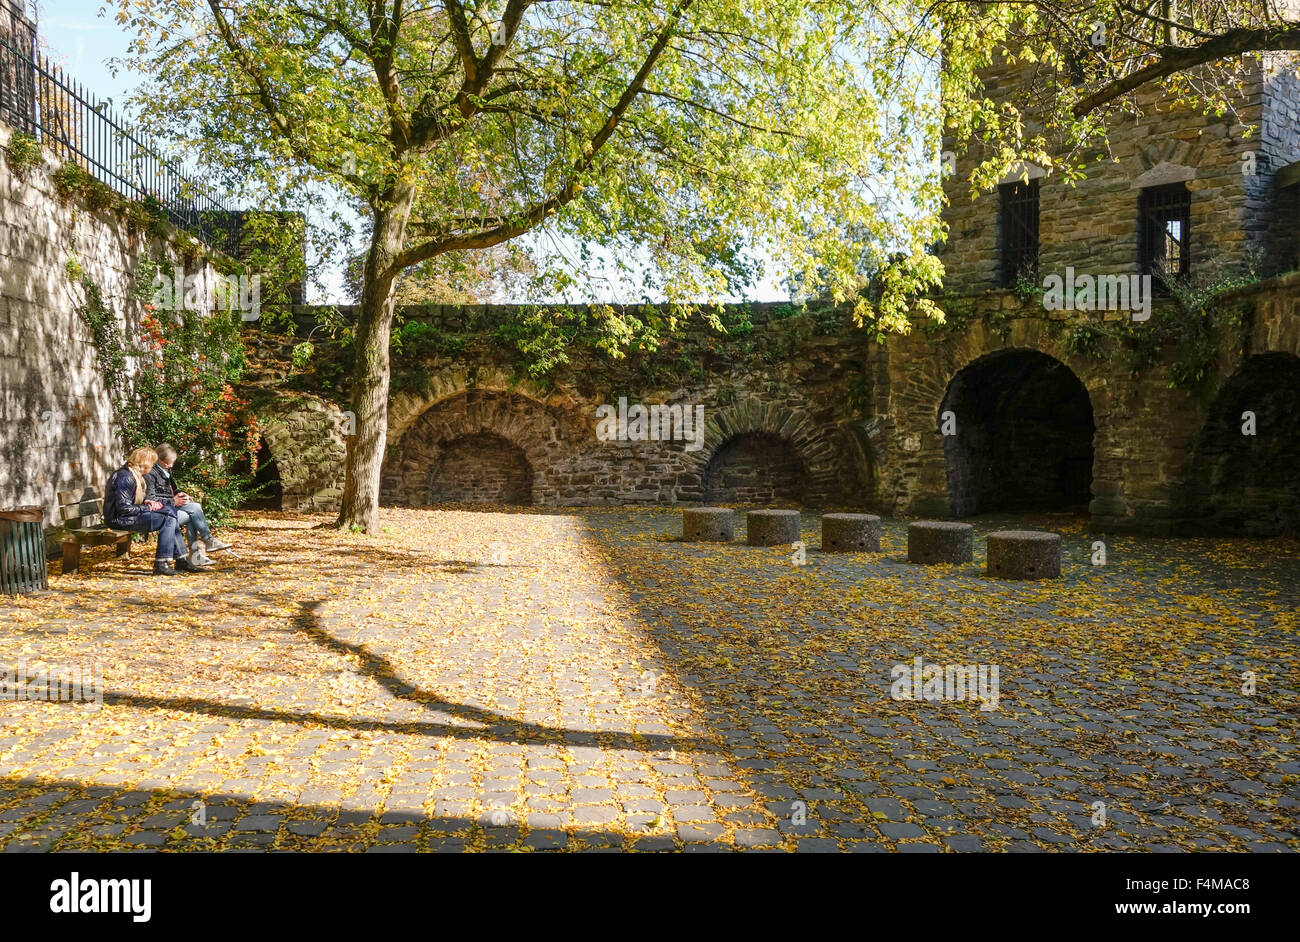 Square at medieval city walls, Onze lieve vrouwewal, Maastricht, Limburg, Netherlands. Stock Photo